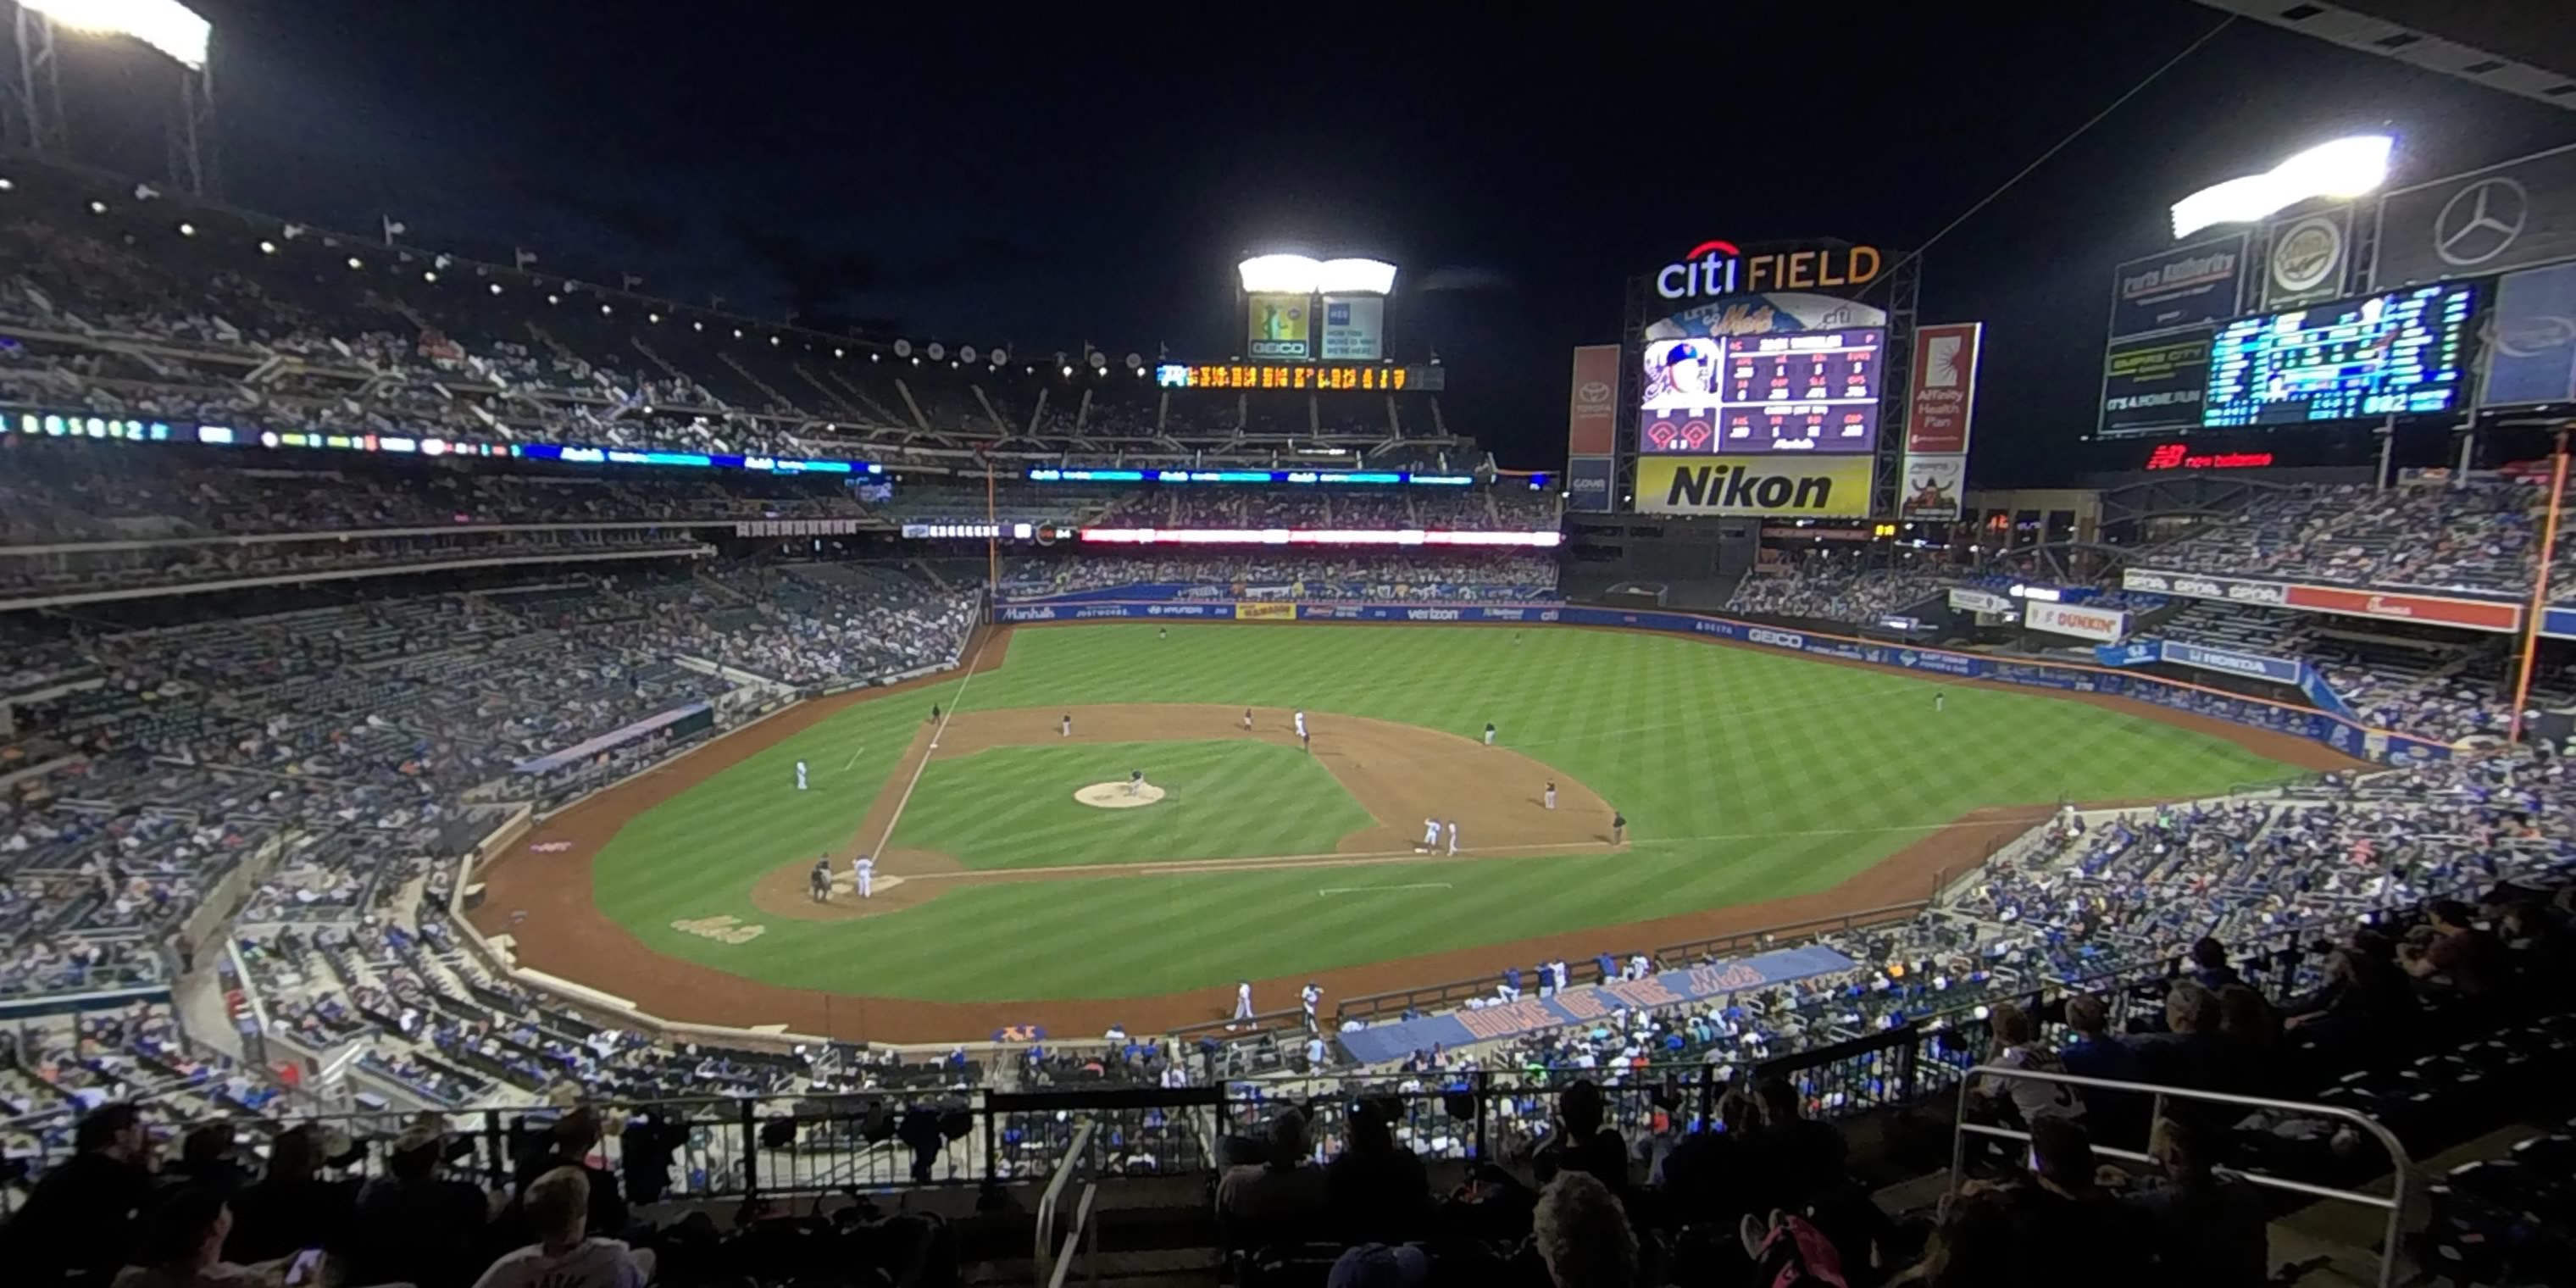 section 313 panoramic seat view  - citi field